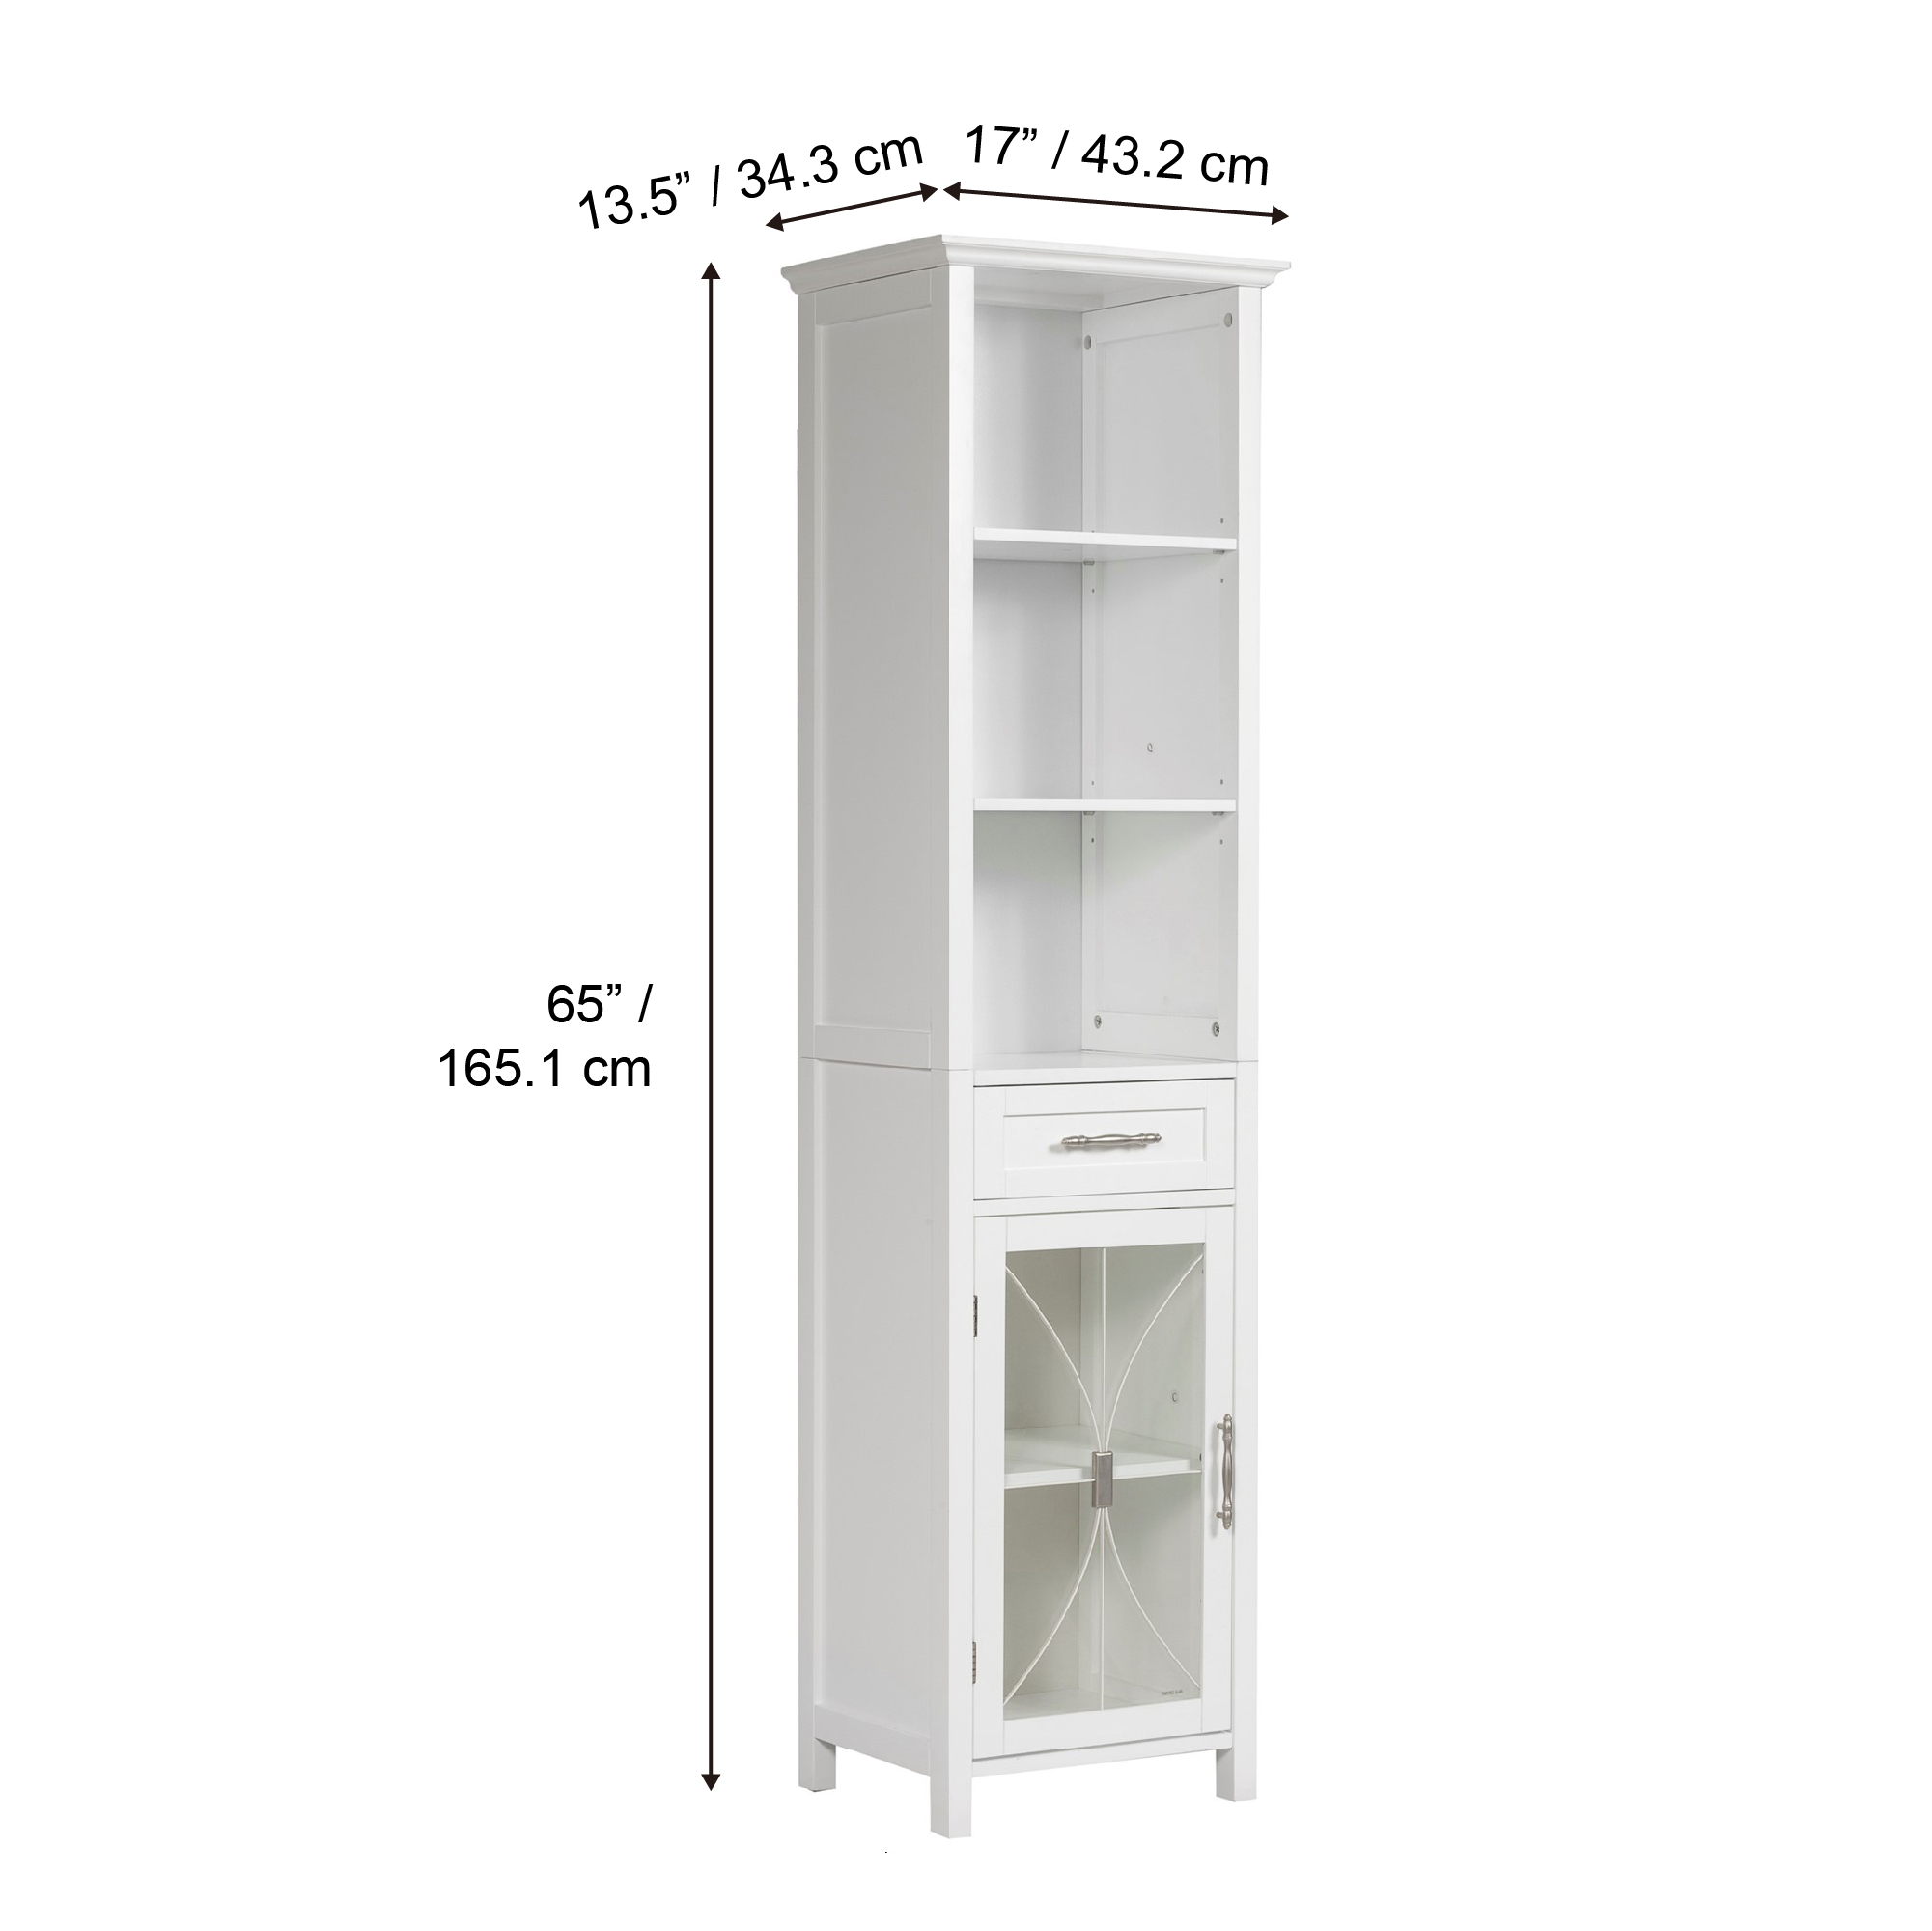 Teamson Home Delaney Wooden Linen Cabinet with Drawer and Open Shelves, White - image 4 of 6